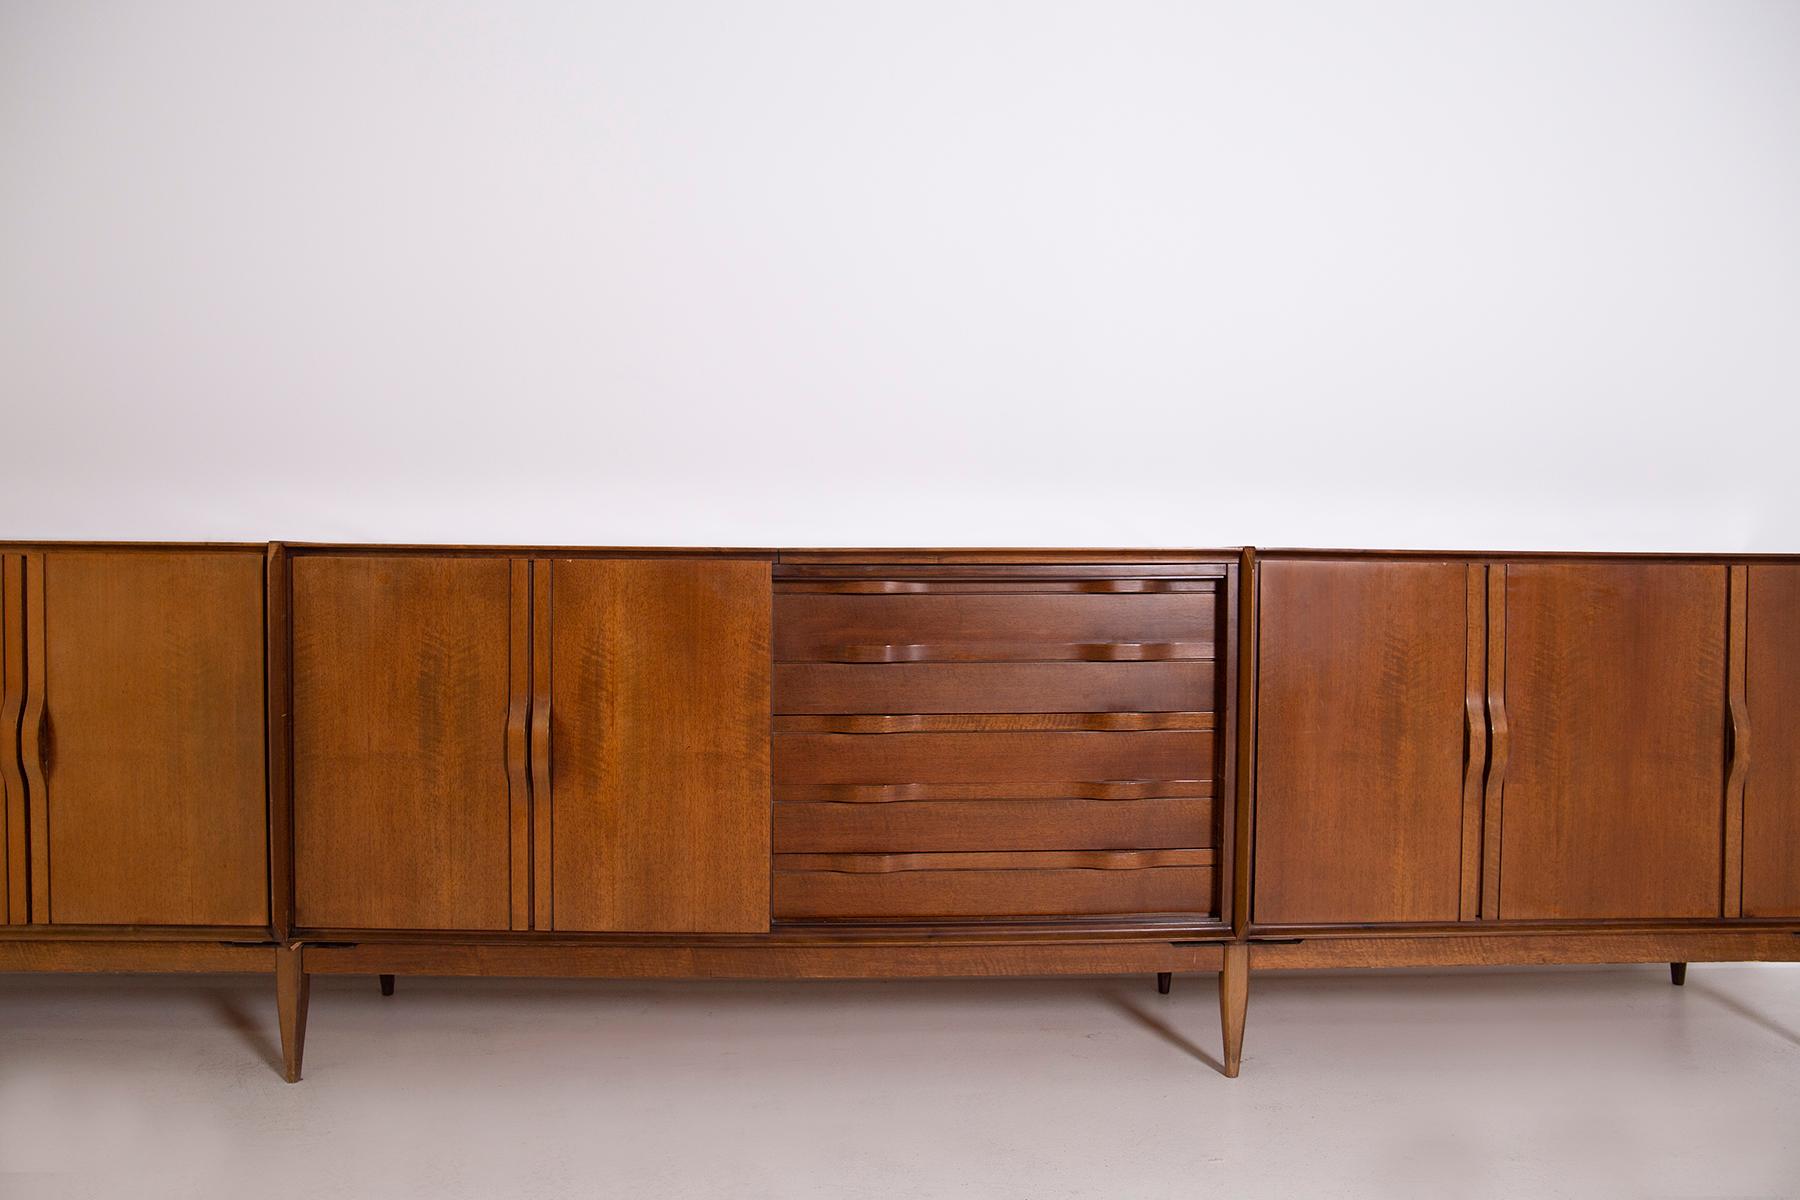 Large Italian sideboard from the 1950s made entirely of walnut. The large Italian sideboard is made in many compartments. It has two single side doors, three double central doors and inserted in the middle a small chest of drawers with 4 drawers.